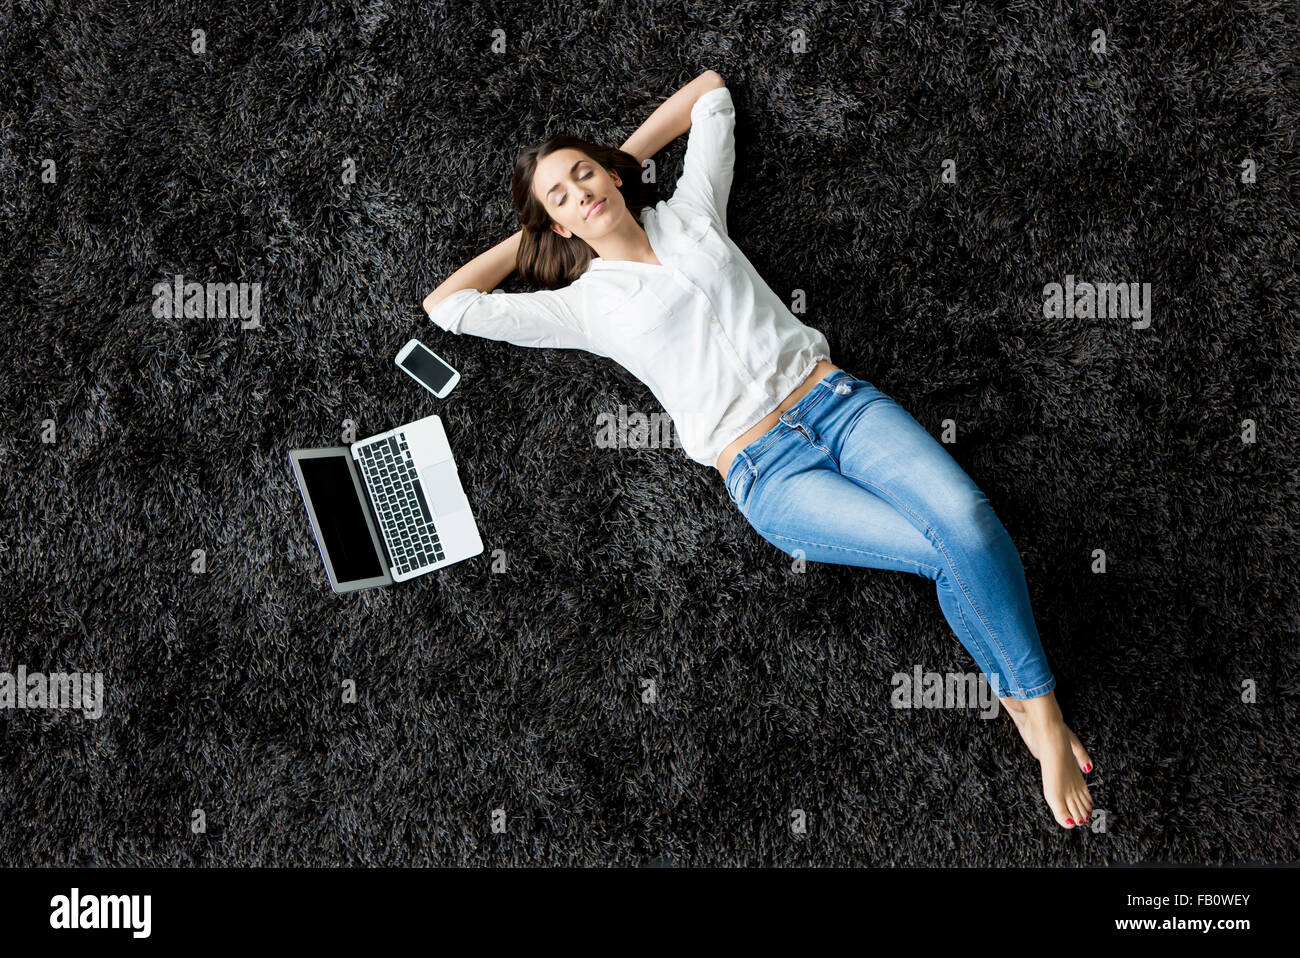 Young woman laying on the carpet Stock Photo